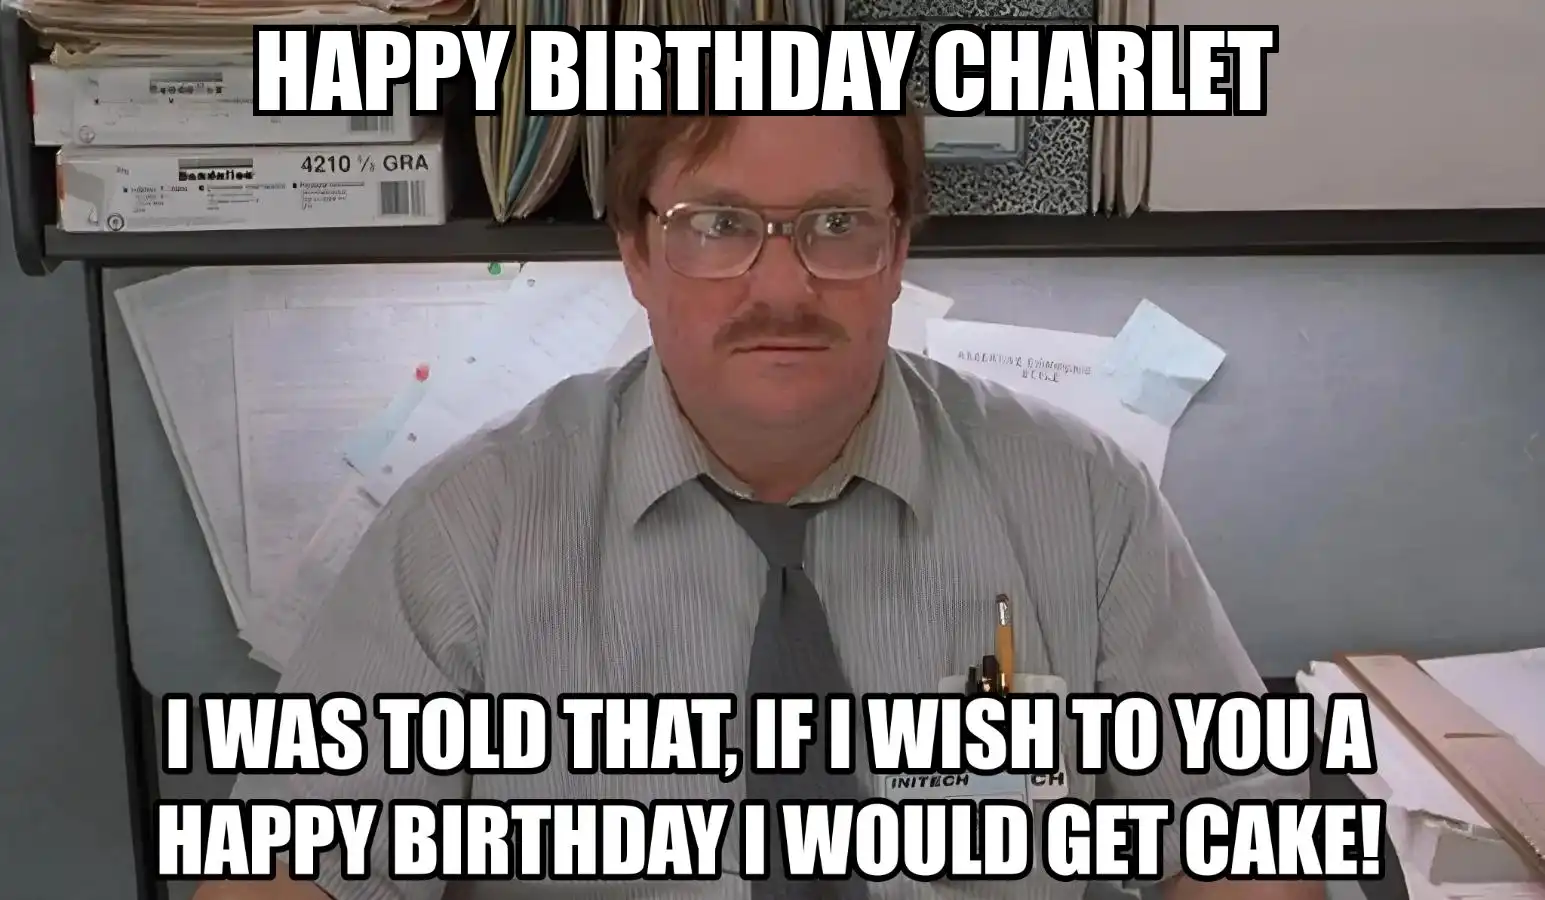 Happy Birthday Charlet I Would Get A Cake Meme